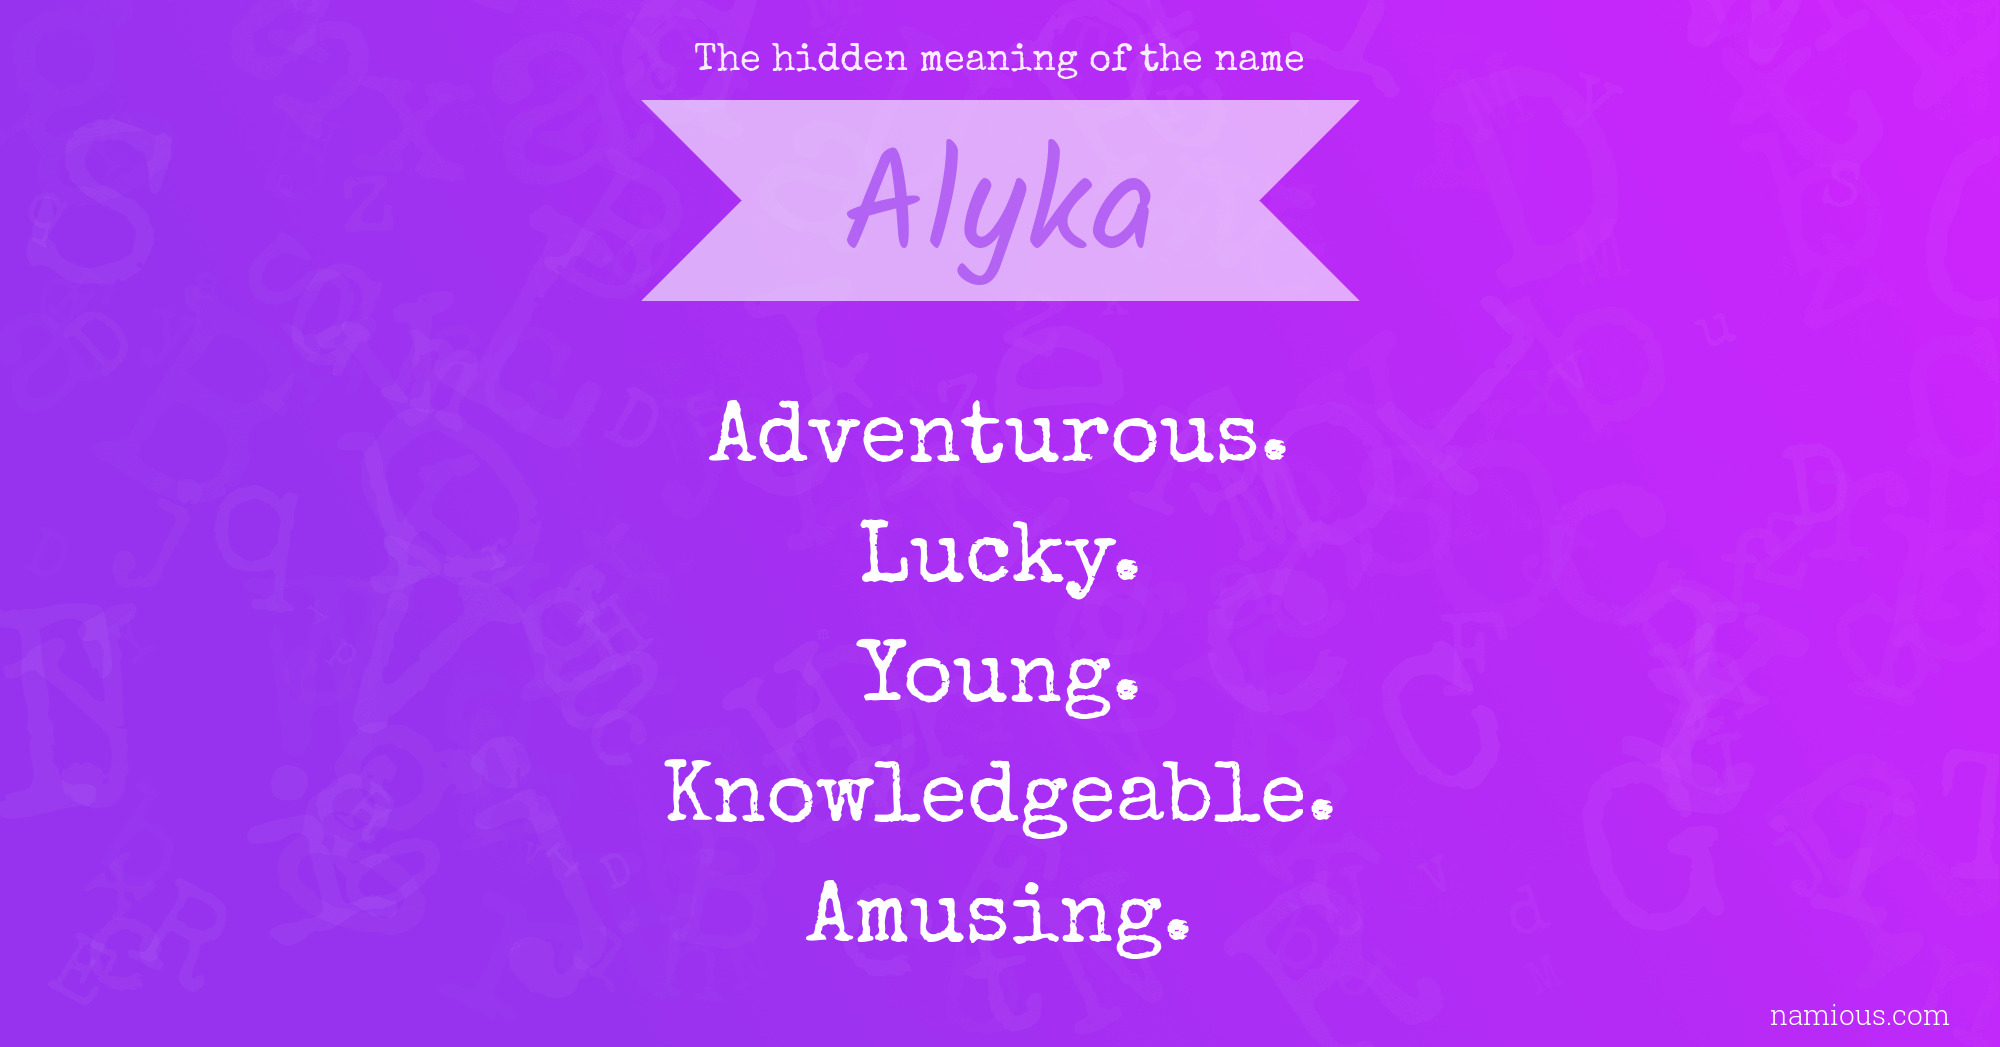 The hidden meaning of the name Alyka